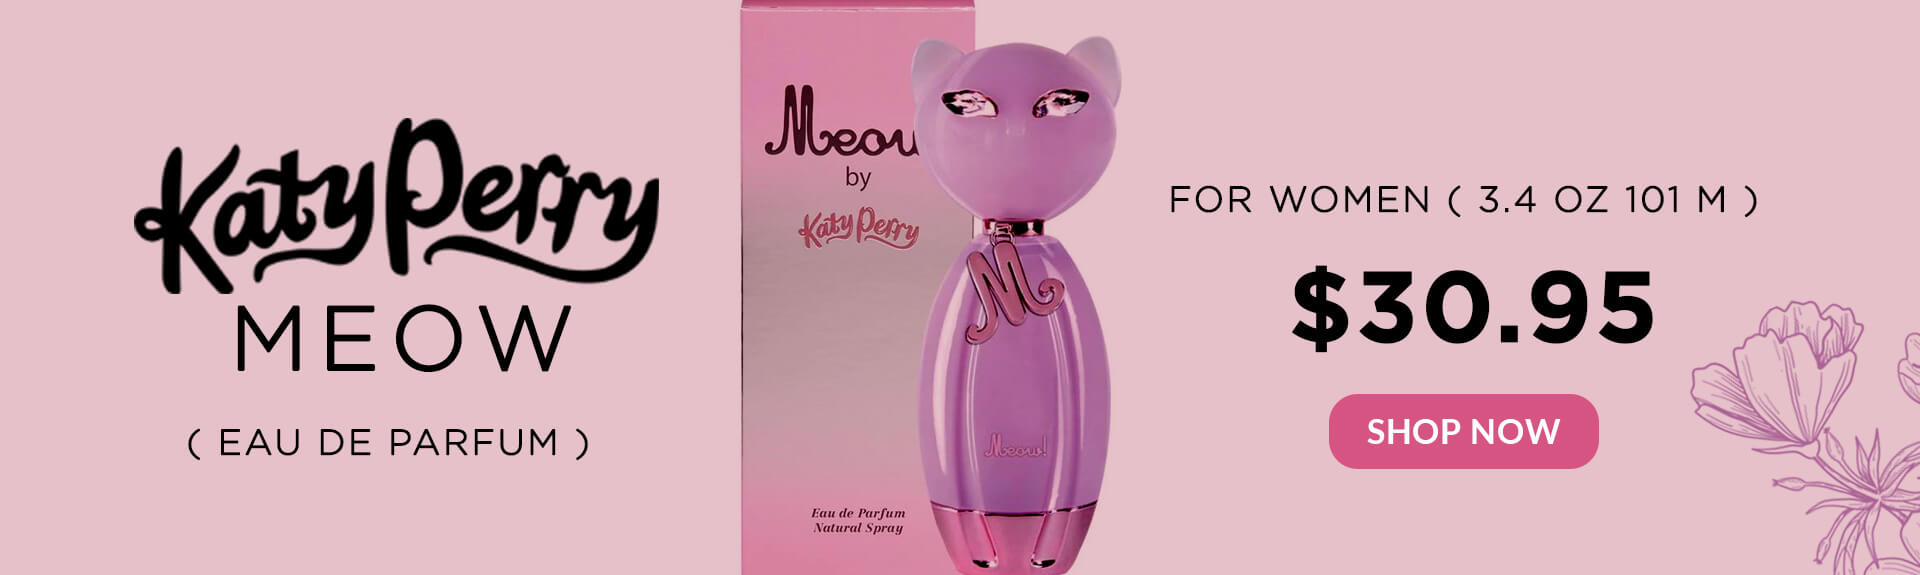 Meow by Katy Perry for Women